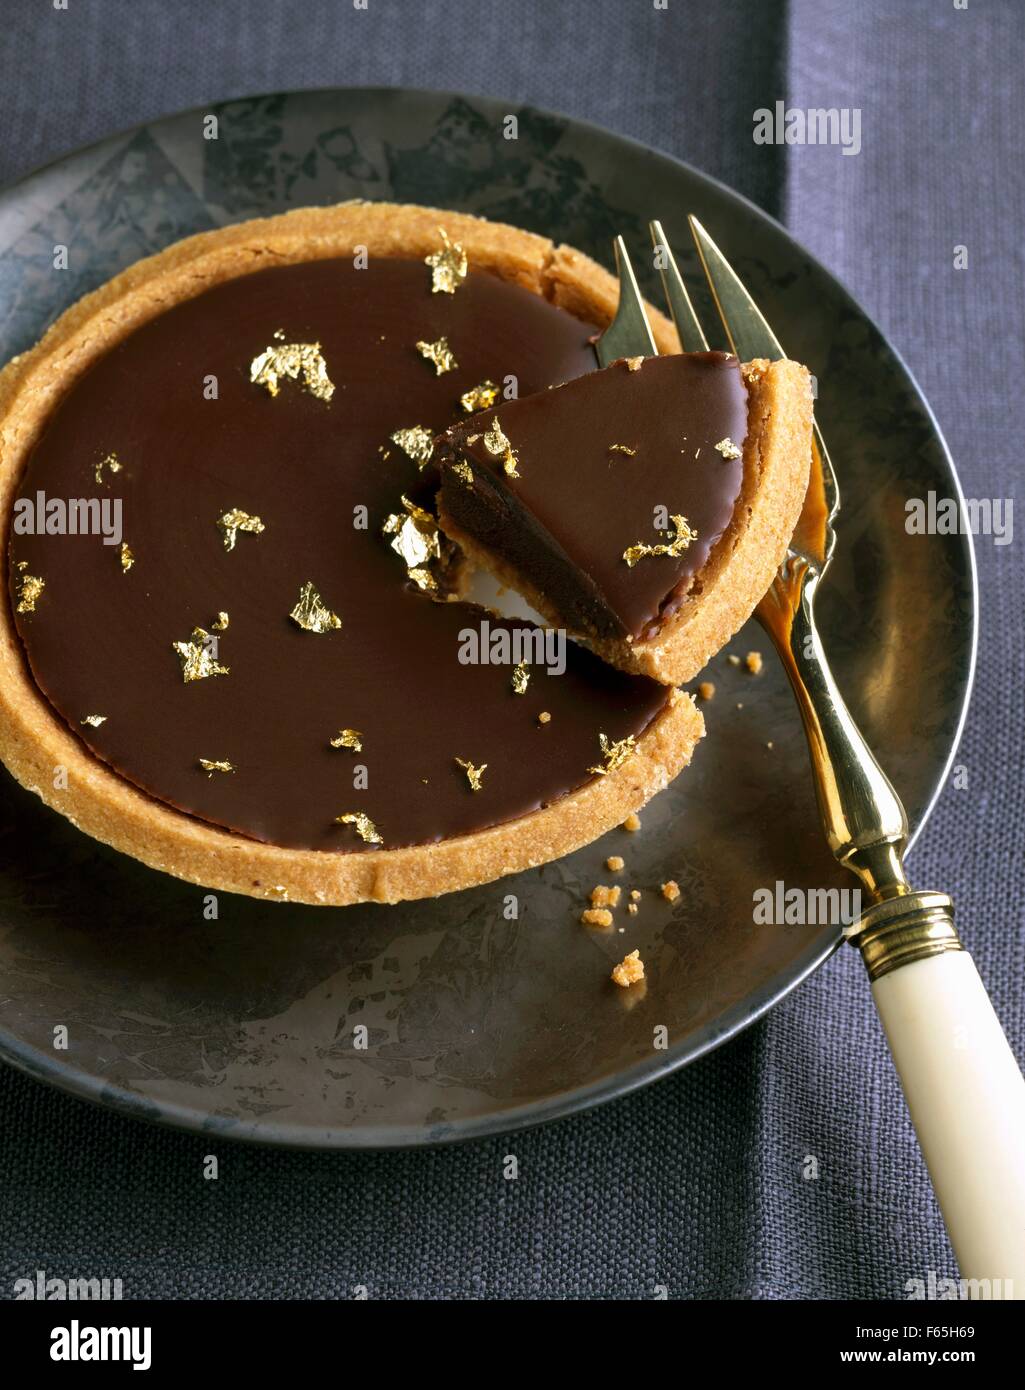 Dark chocolate tartlet with gold flakes Stock Photo